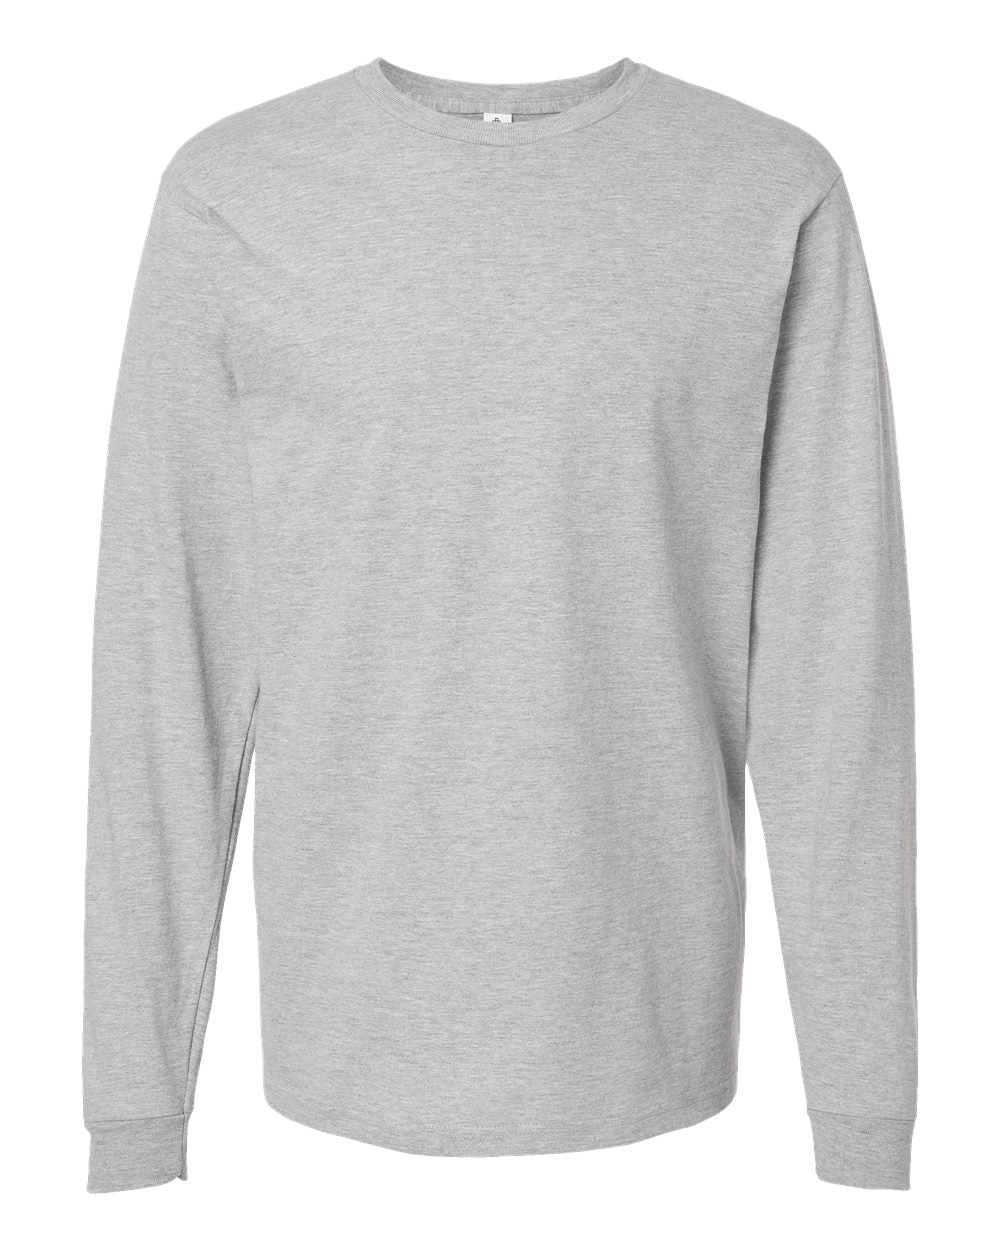 Heather Gray Long Sleeve Top - T9473HG